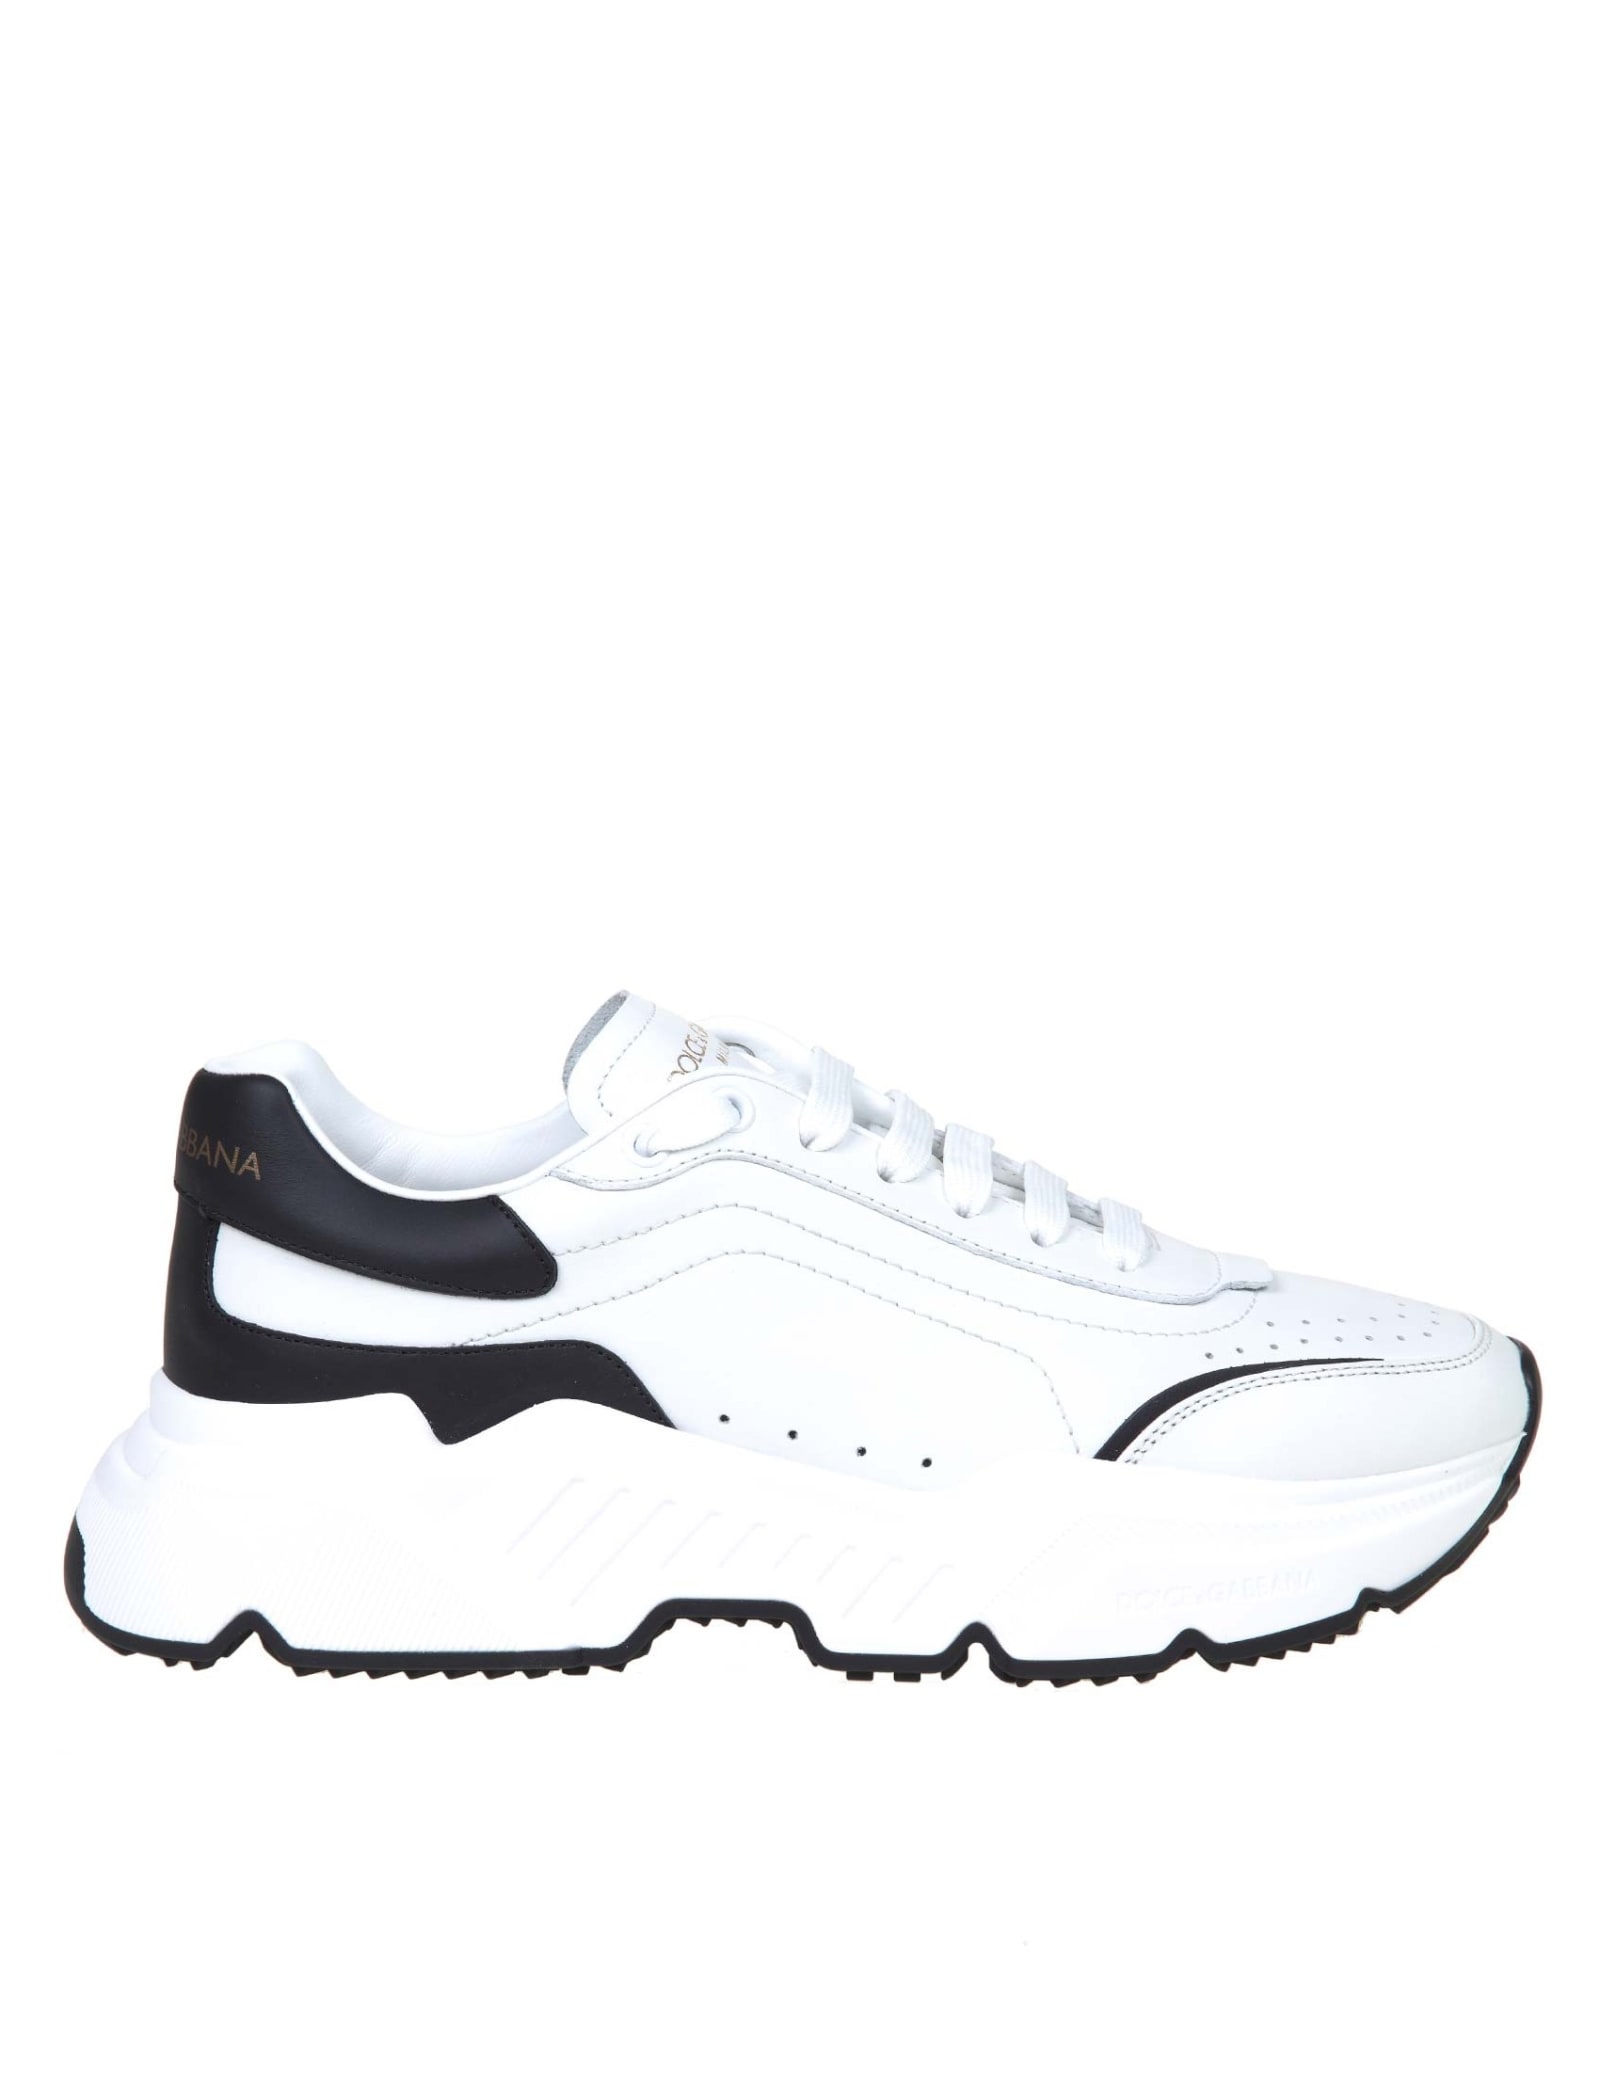 Dolce & Gabbana Daymaster Sneakers In White / Black Leather